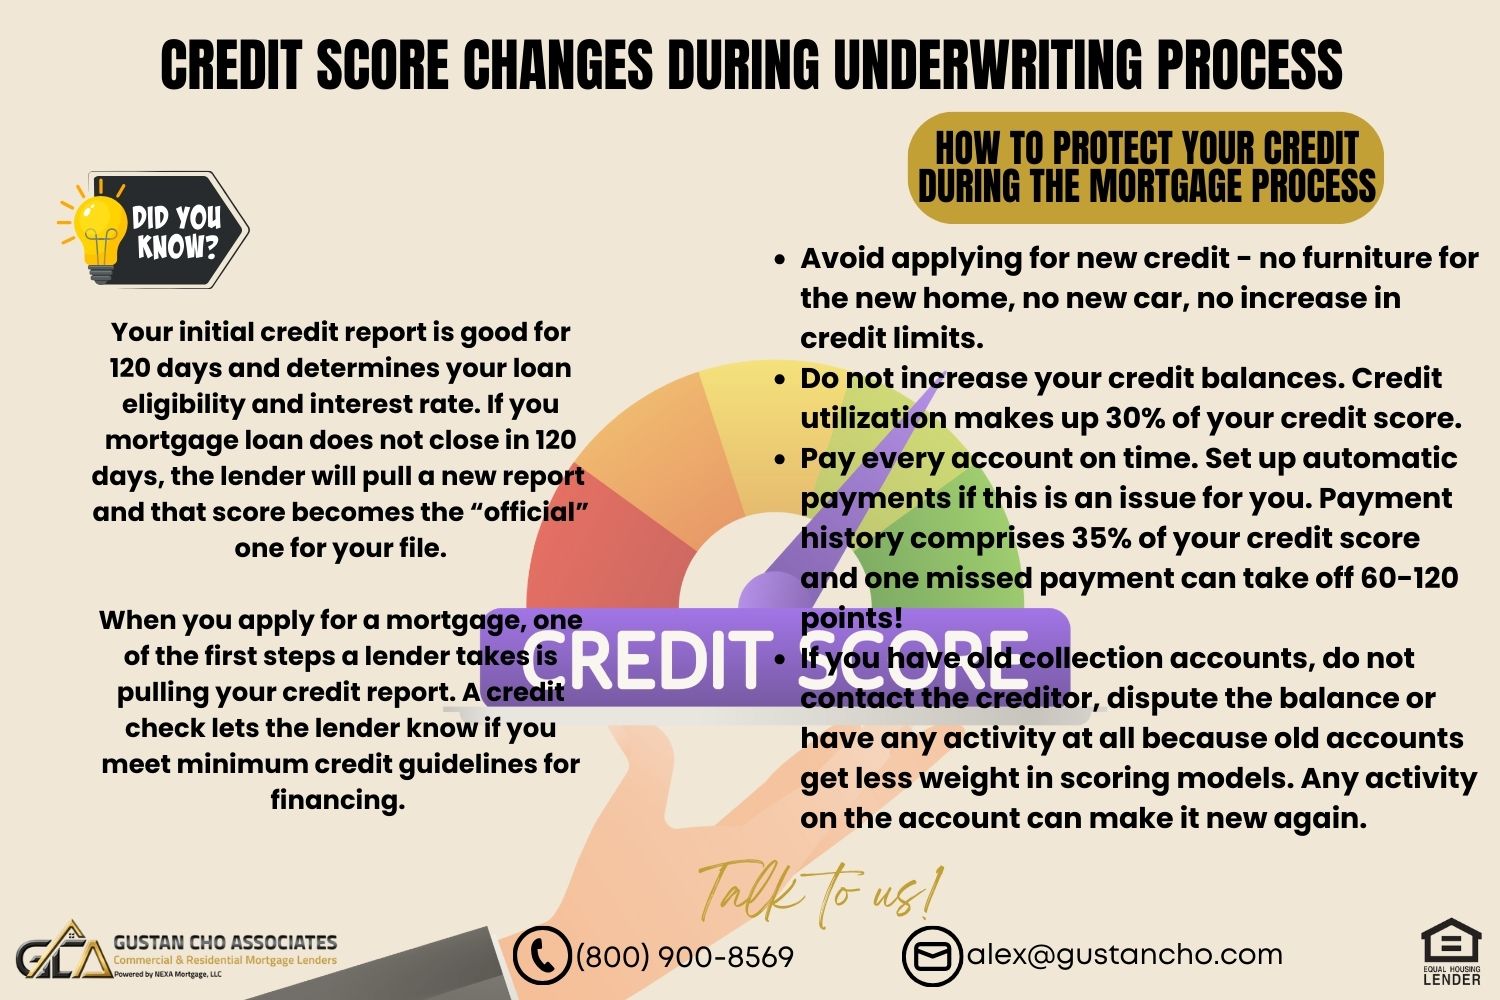 Credit Score Fluctuations: Why Does My Credit Report Fluctuate?